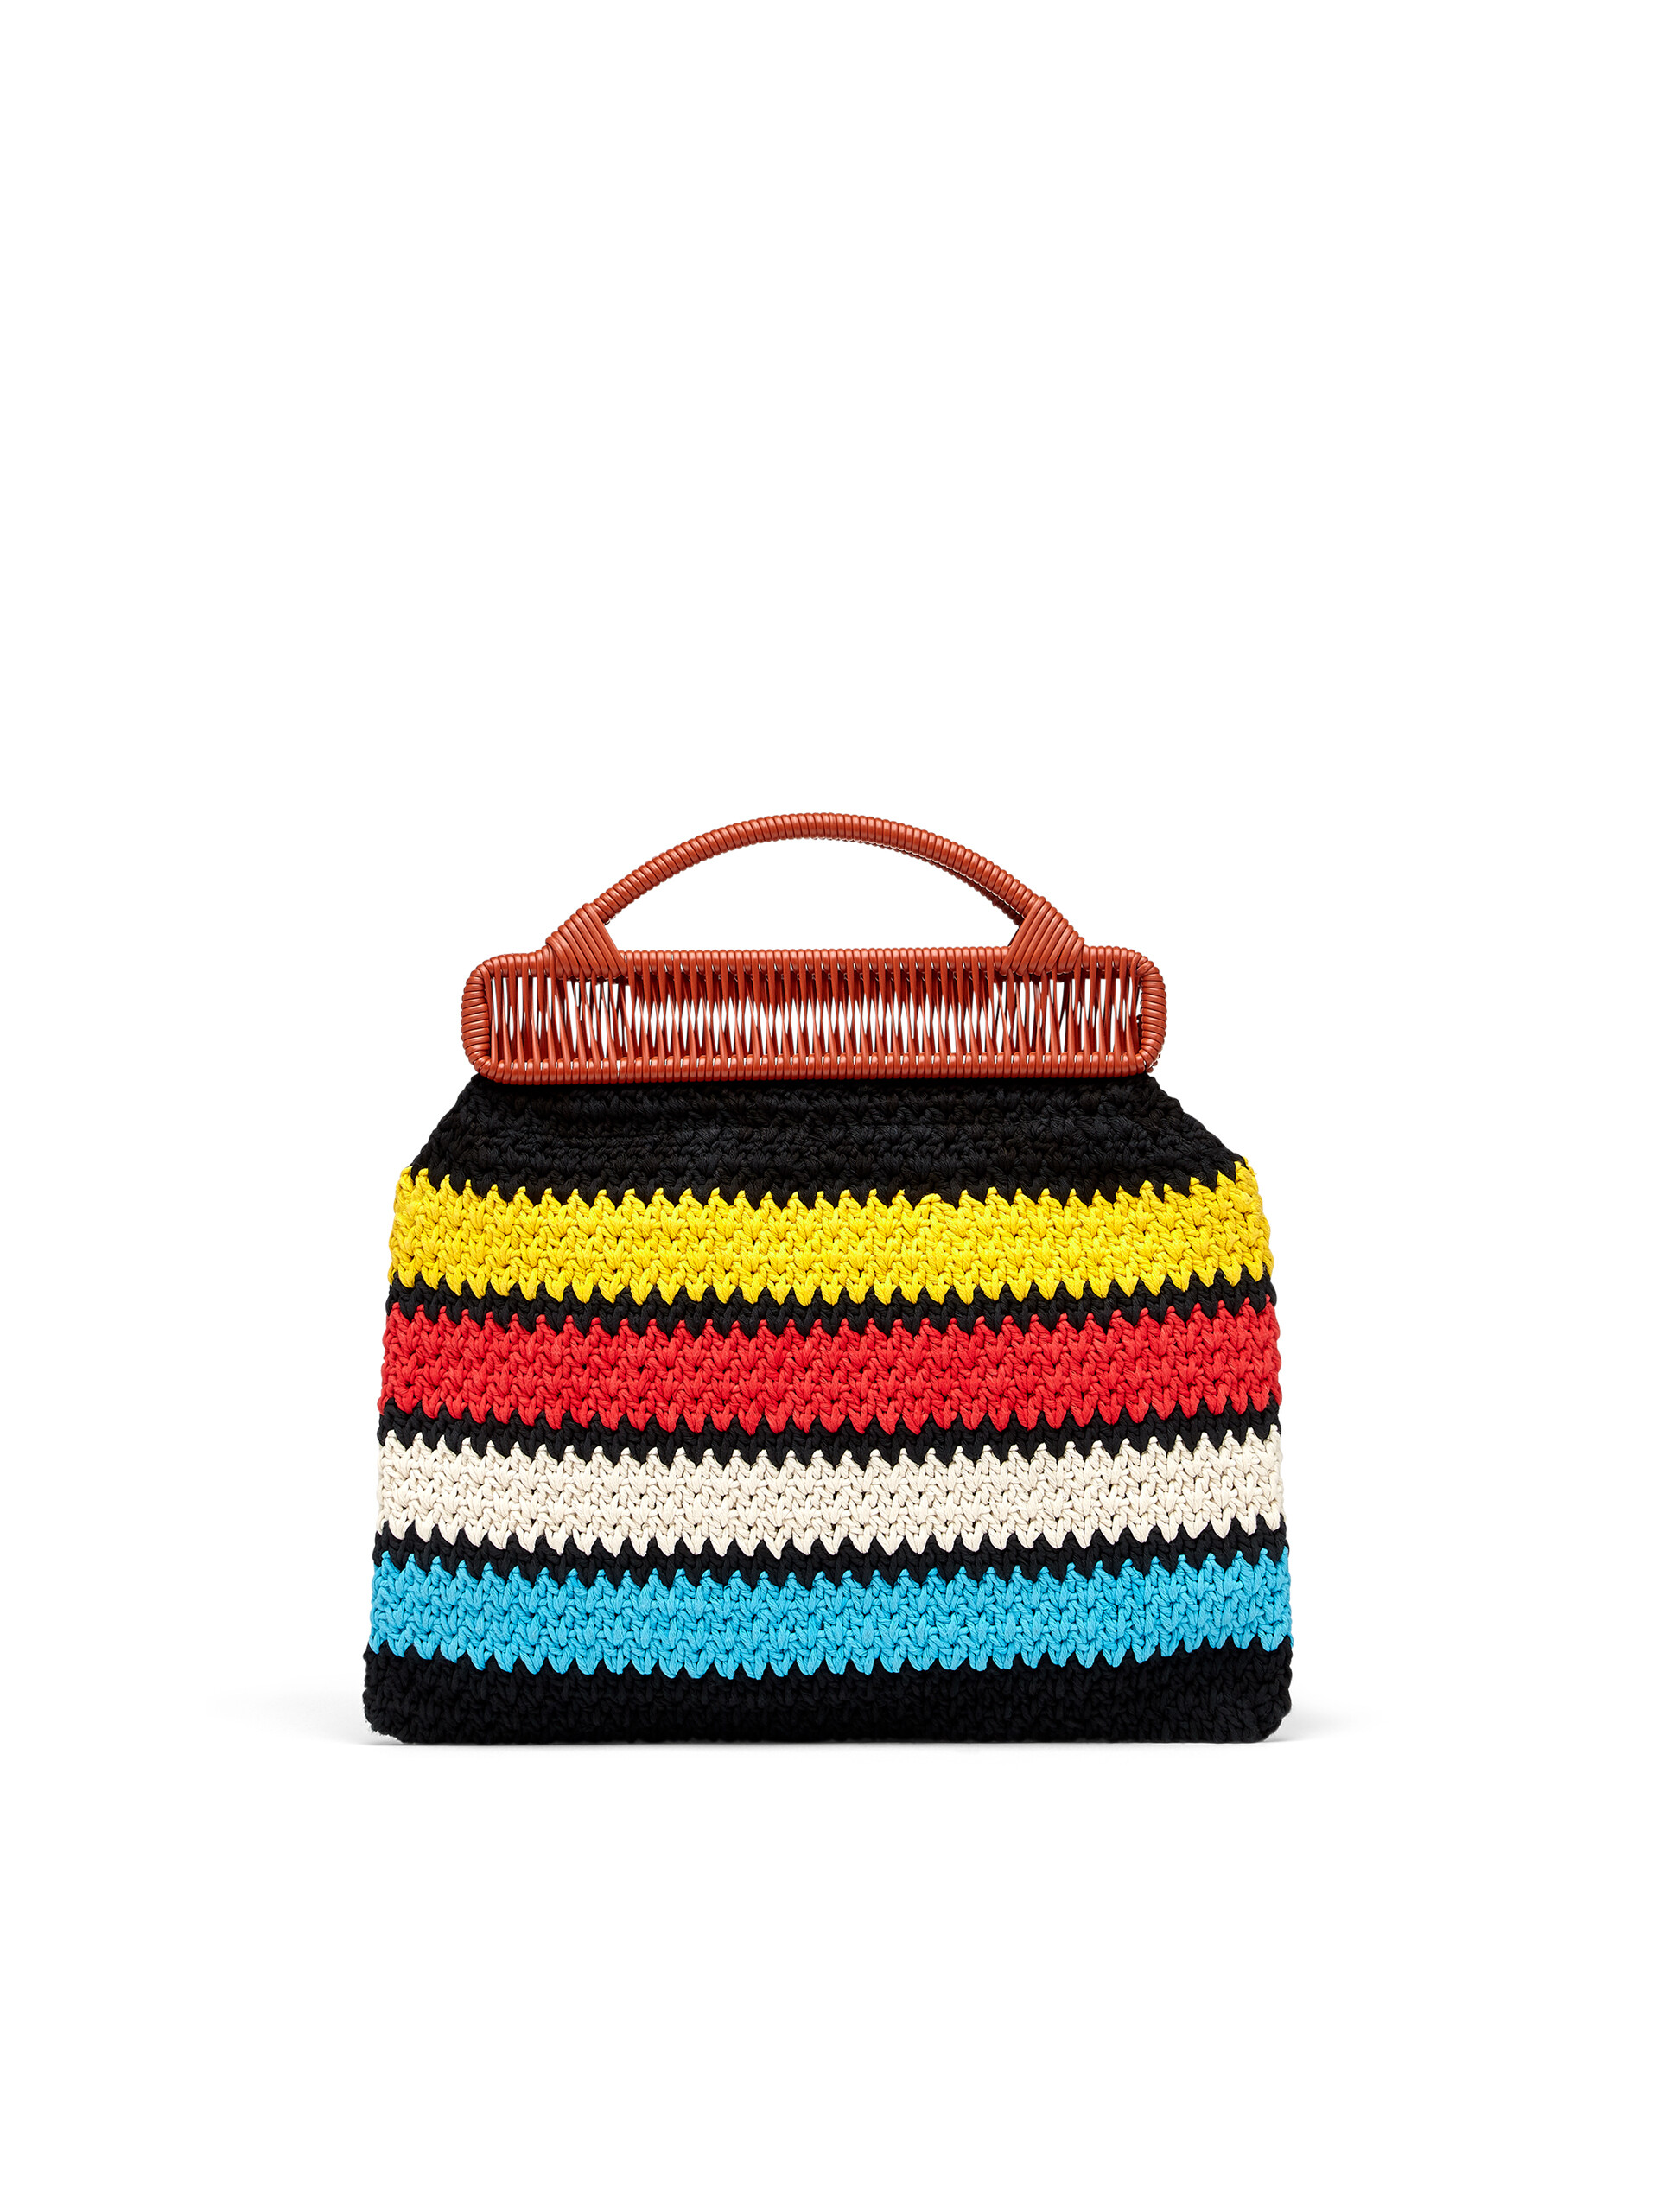 MARNI MARKET frame bag with striped motif in yellow, red, white, pale blue and black crochet cotton blend - Furniture - Image 3